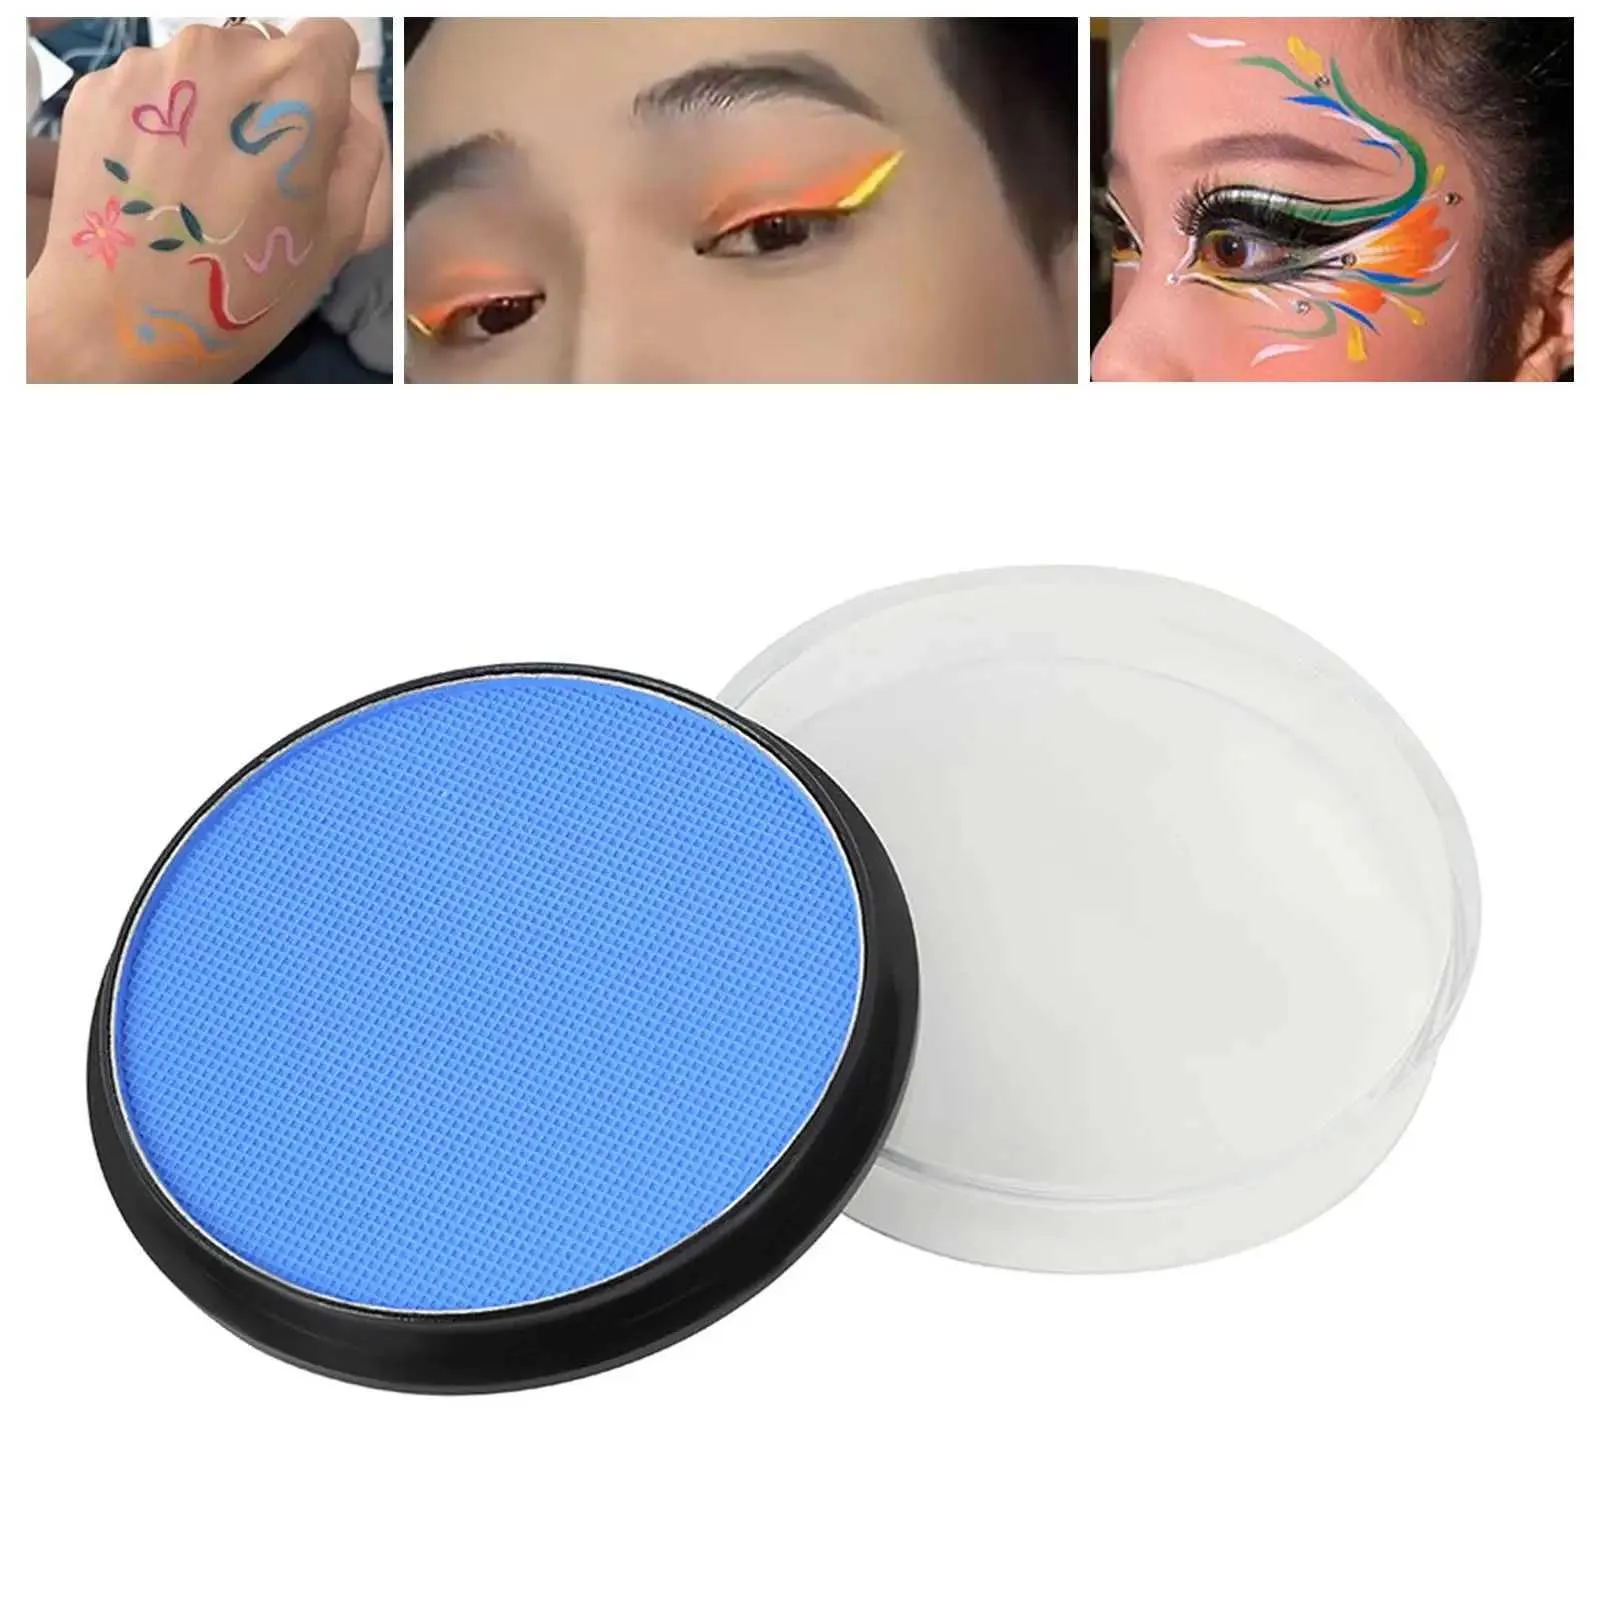 Face Painting Face Paint Pigment Washable Body Paint Basic Color Pigment for Parties Birthday Carnivals Campfire Party Festival